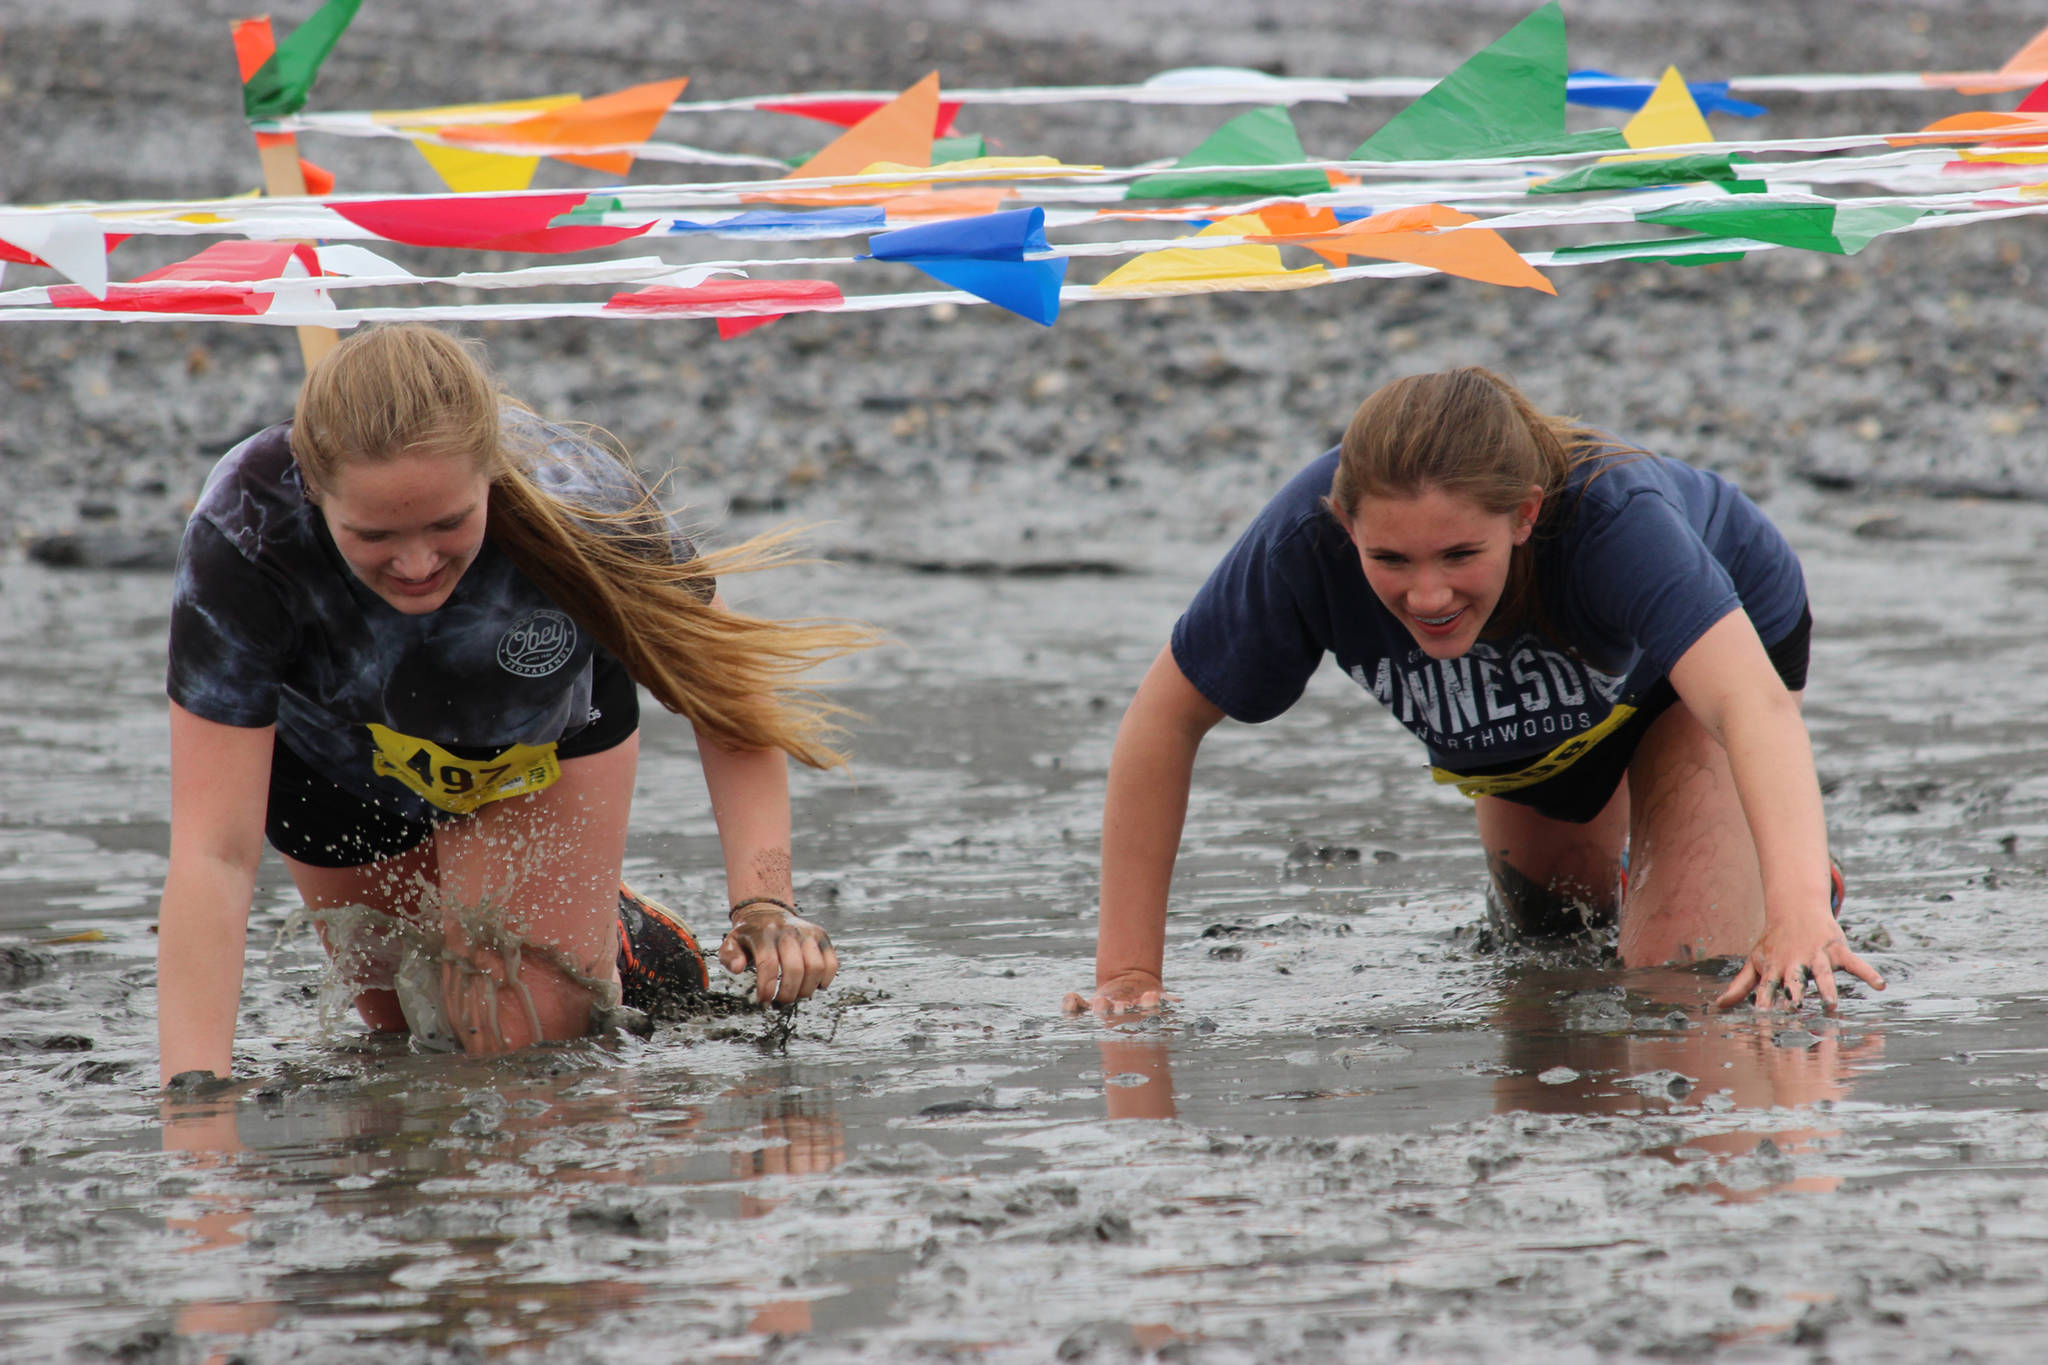 The mother-and-daughter team Kaylee Fenn, left, and Julia Hanson, right, navigate through one of the course challenges in the 2018 5K Clam Scramble, held June 16, 2018, in Ninilchik, Alaska. The fun run is held during low tide on Ninilchik beach. (Photo by Sabrina Ferguson)